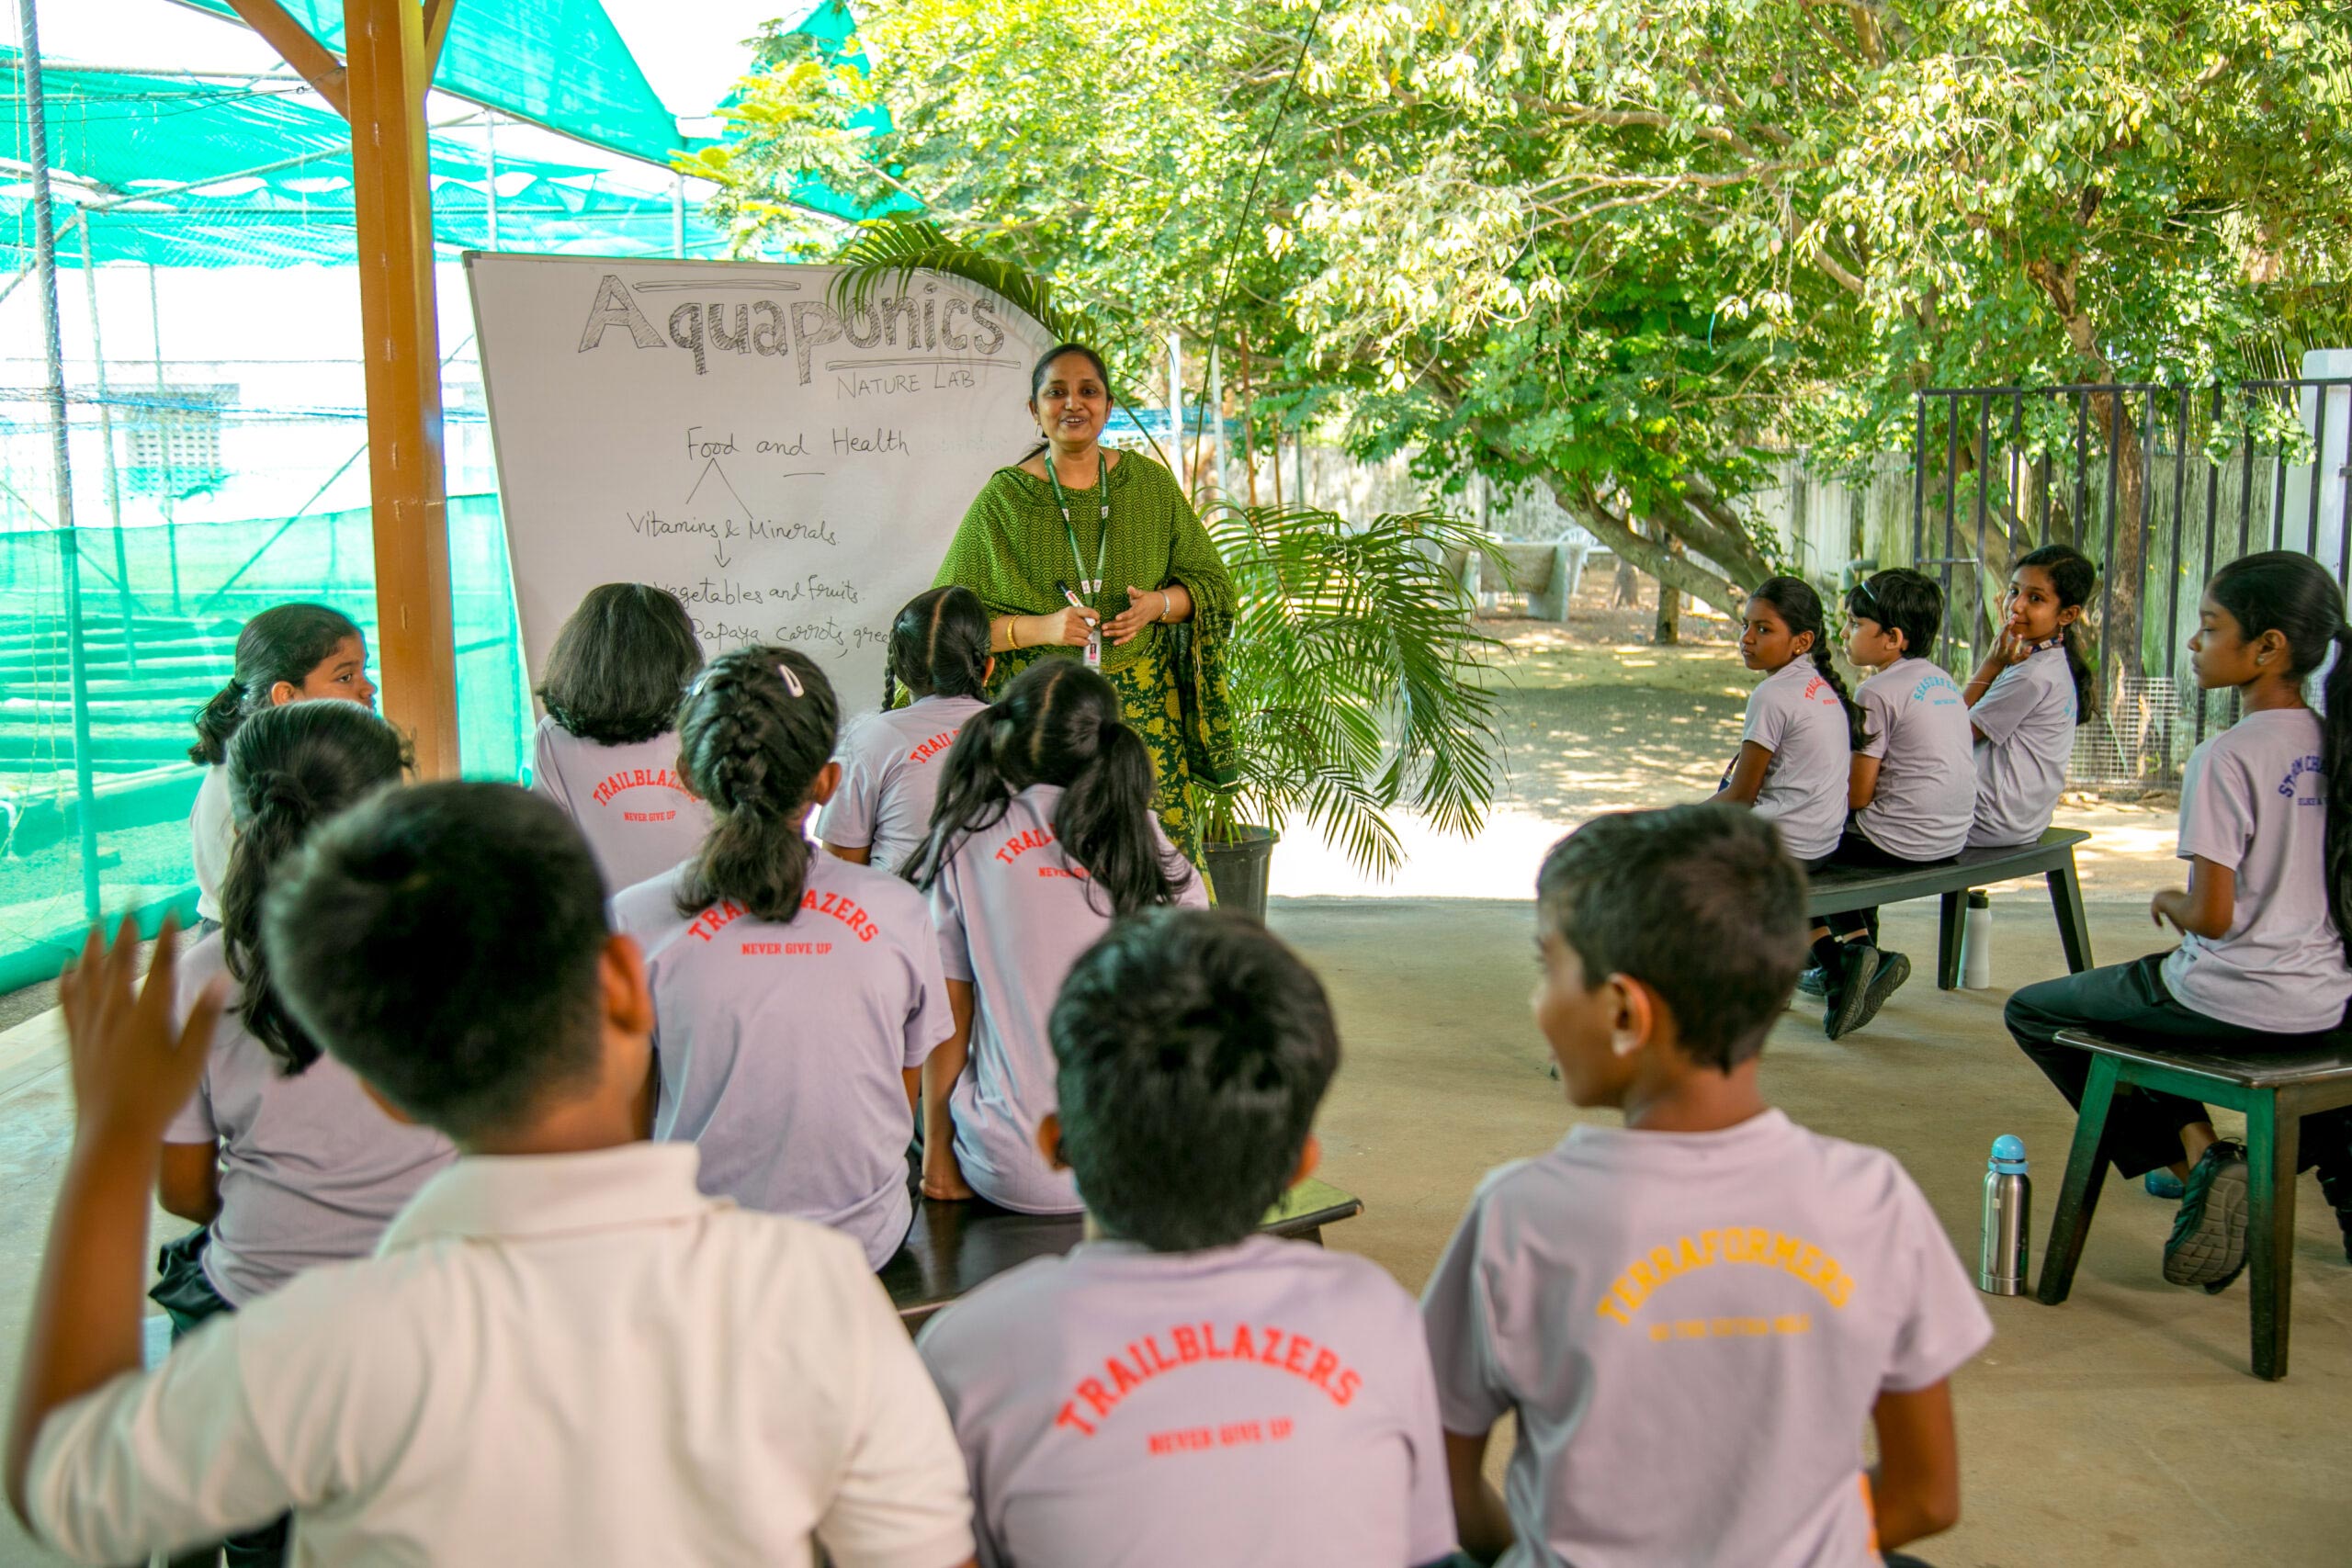 The image shows an active class with students and a teacher along with nature.